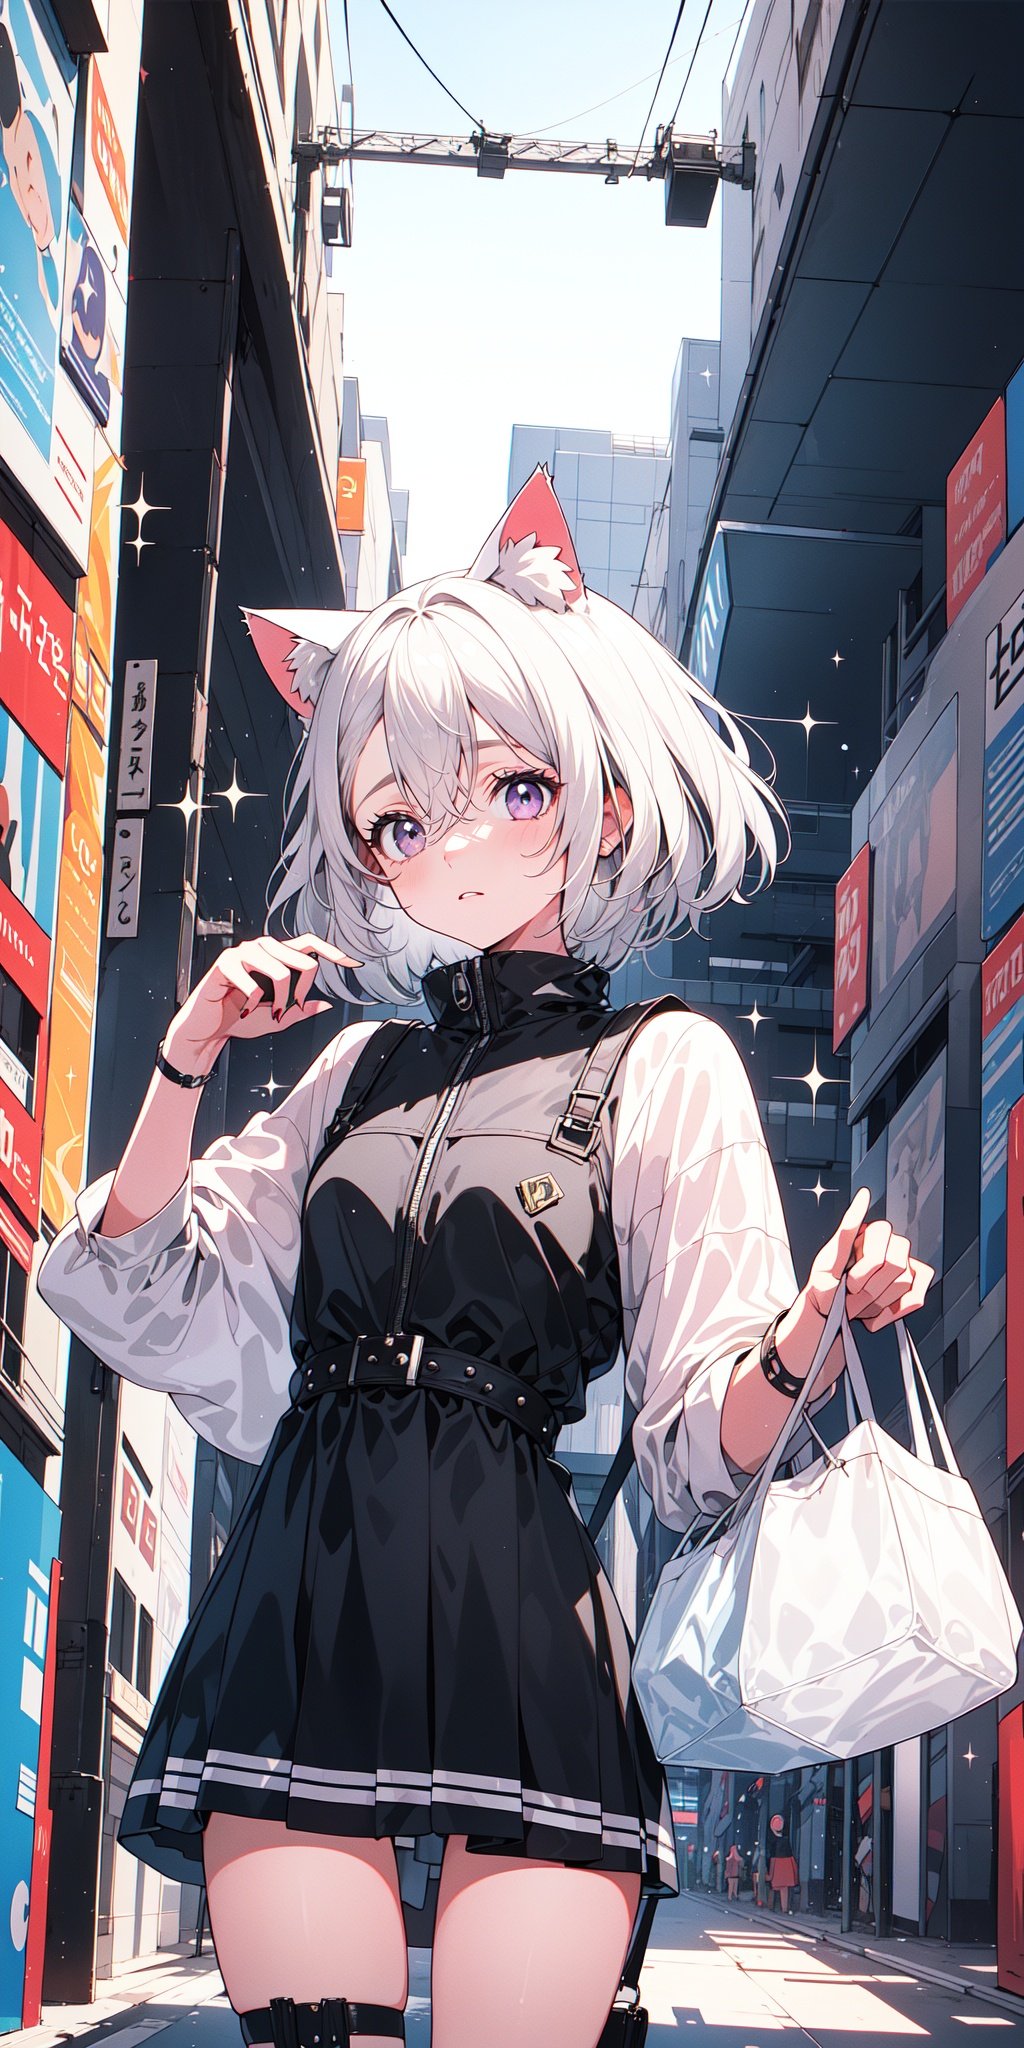 (masterpiece:1.3)), (cat ears, ((short hair)), silver hair, white hair, purple eyes:1.5), 1girl solo ((sparkle:1.3)), eye focus, ((1girl)),Android, ((solo)), cowboy_shot, beautiful detailed eyes, expressive eyes, pretty eyelashes, ((shiny eyes)), (((glossy eyes))), reflective eyes, sparkly eyes, sparkles in eyes, cyborg, artificial arms, artificial legs, ((1990s (style):1.4)), ((vaporwave:1.3)), (purple_theme:1.1), neon_palette, ((neon_lights)), chromatic_aberration, (scan_lines:0.5) ,((commercial street)),(Carrying a transparent small handbag),There are of course those who do not want us to speak We spin the world like a pinball machine We have thoughts of a life in abundance Day and night we wish movies were real And what's behind the screen is our entrance I'm like a satellite Transmitting different eras I am the voice of the next generation Completely digital Create synthetic auras Start a revolution now You will never have to cry 'Cause the future is sold You can never die And you'll never grow old Oh, oh-oh But everything surrounding you is digital Never break the mold You do as you're told Freedom is for sale If you give them control Oh, oh-oh Erase return In the digital world I know it feels like you're part of a dream You can fly and fight wars without judgement You respawn and mistakes will repeal But you will always be searching for an answer I'm like a satellite Transmitting different eras I am the voice of the next generation Completely digital Create synthetic auras Start a revolution now You will never have to cry 'Cause the future is sold You can never die And you'll never grow old Oh, oh-oh But everything surrounding you is digital Never break the mold You do as you're told Freedom is for sale If you give them control Oh, oh-oh Erase return In the digital world Start a revolution now Start a revolution now (Now, now, now, now, now) (We have thoughts of a life in abundance) (Day and night we wish movies were real) (And what's behind the screen is our entrance) You will never have to cry 'Cause the future is sold You can never die And you'll never grow old Oh, oh-oh But everything surrounding you is digital Never break the mold You do as you're told Freedom is for sale If you give them control Oh, oh-oh Erase return In the digital world, fcportrait